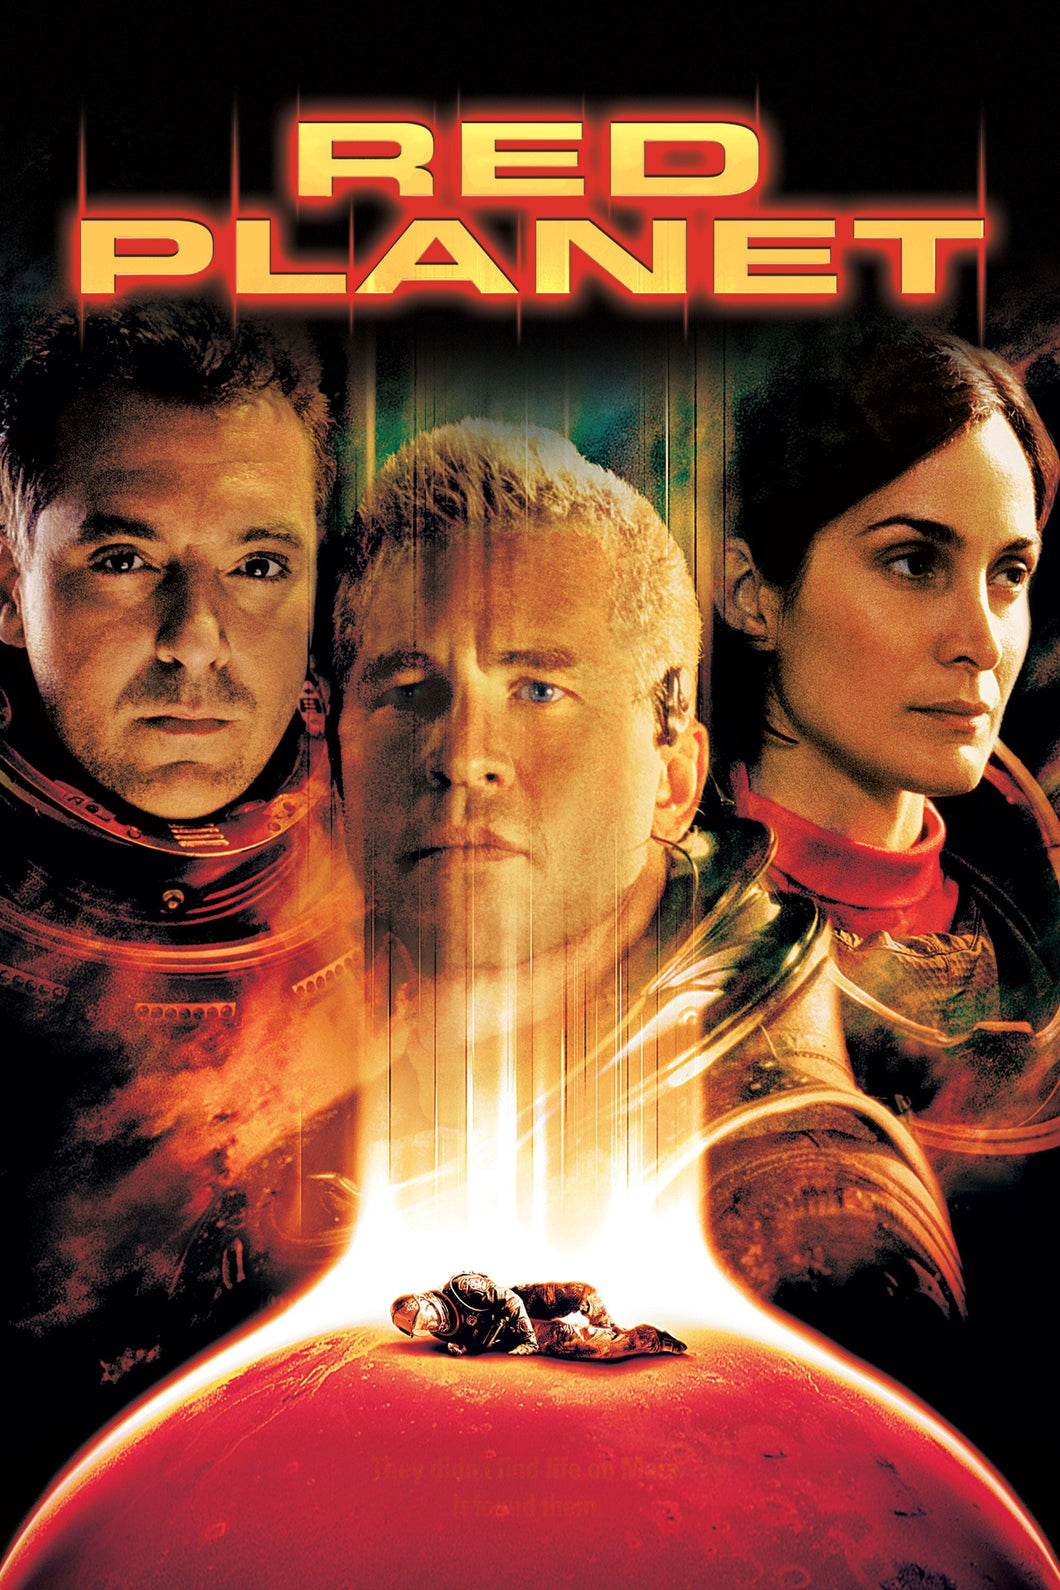 Red Planet (2000) Movie Poster High Quality Glossy Paper A1 A2 A3 A4 A3 Framed or Unframed!!!